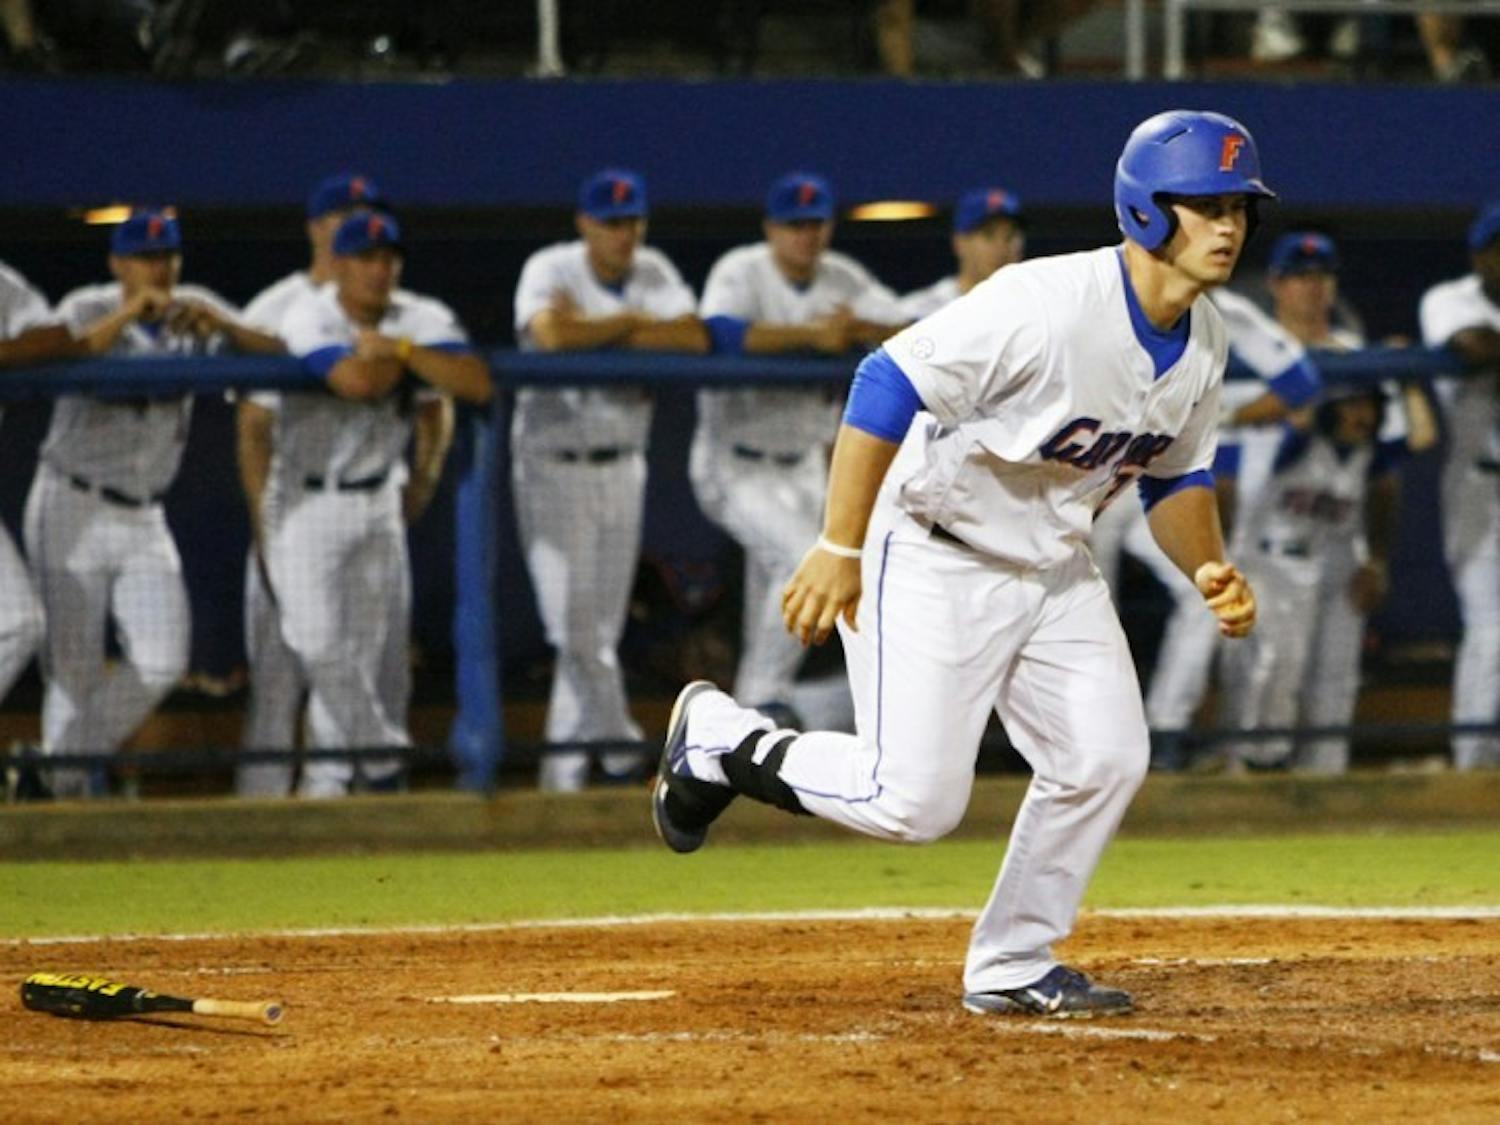 Preston Tucker knocked in a game-high three runs in Florida's 10-2 win against Vanderbilt in Friday night's Southeastern Conference opener.